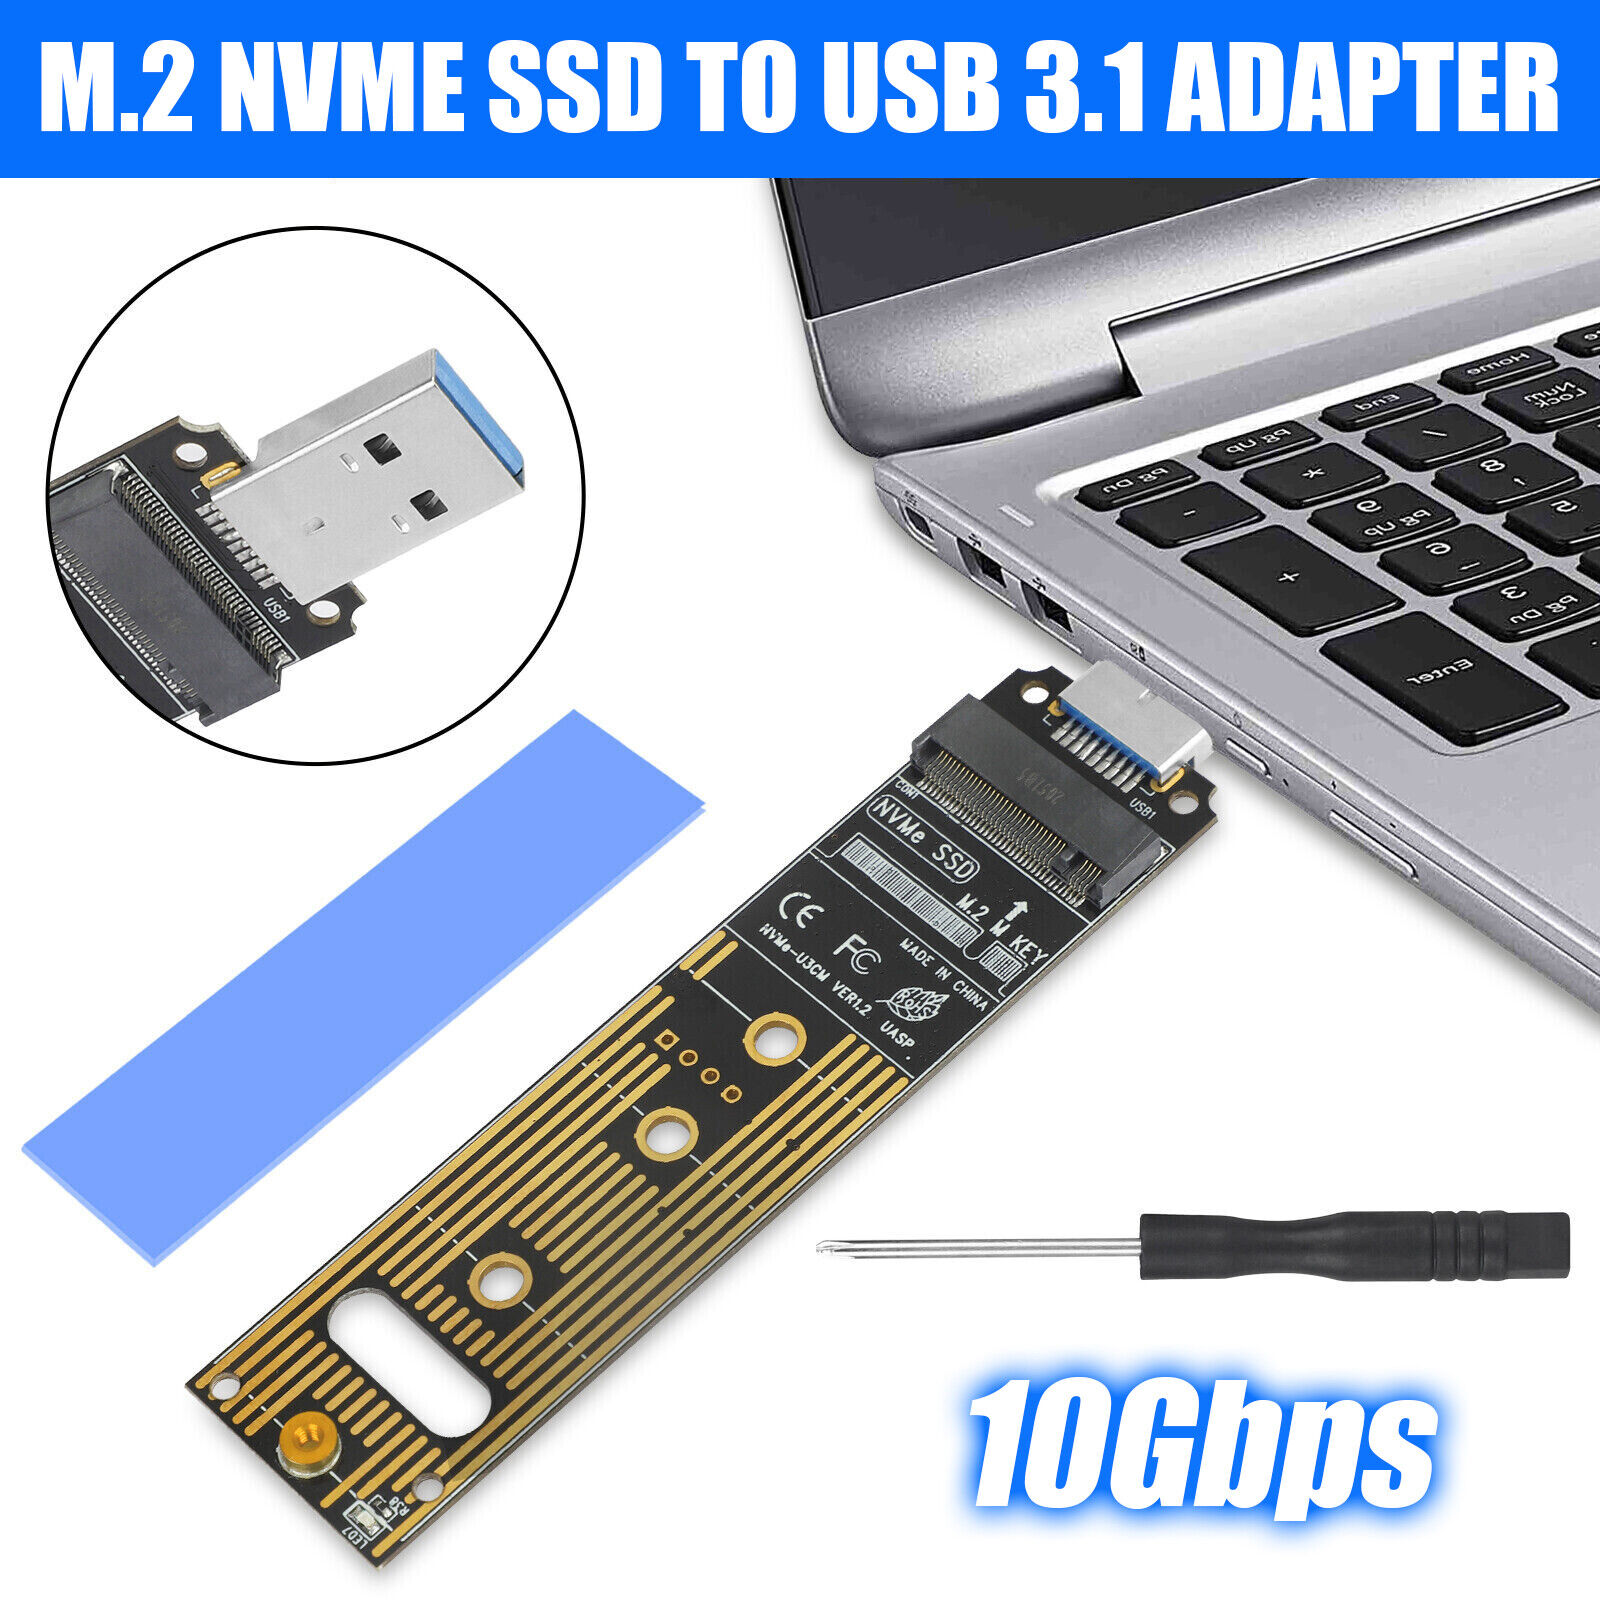 M.2 NVME SSD to USB 3.1 Adapter Hard Drive for PCIe NVMe Based M Key B+M Key SSD